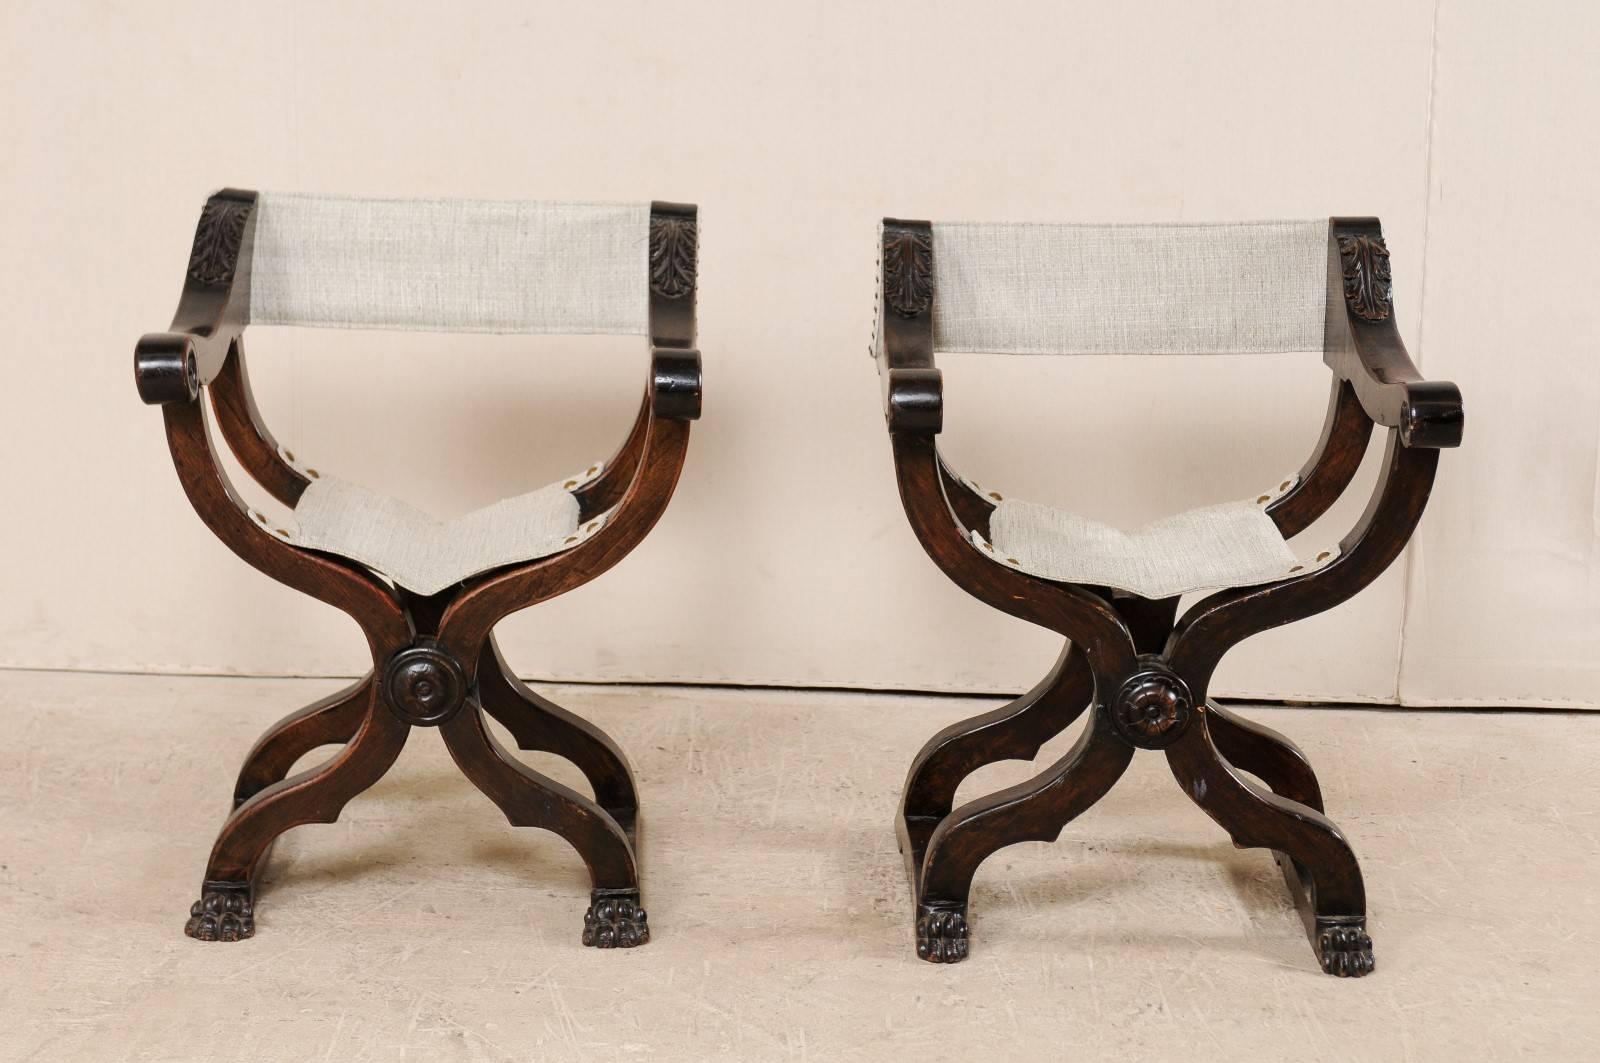 20th Century Pair of Italian X-Framed Dante Style Chairs in Rich Wood, Upholstered in Linen